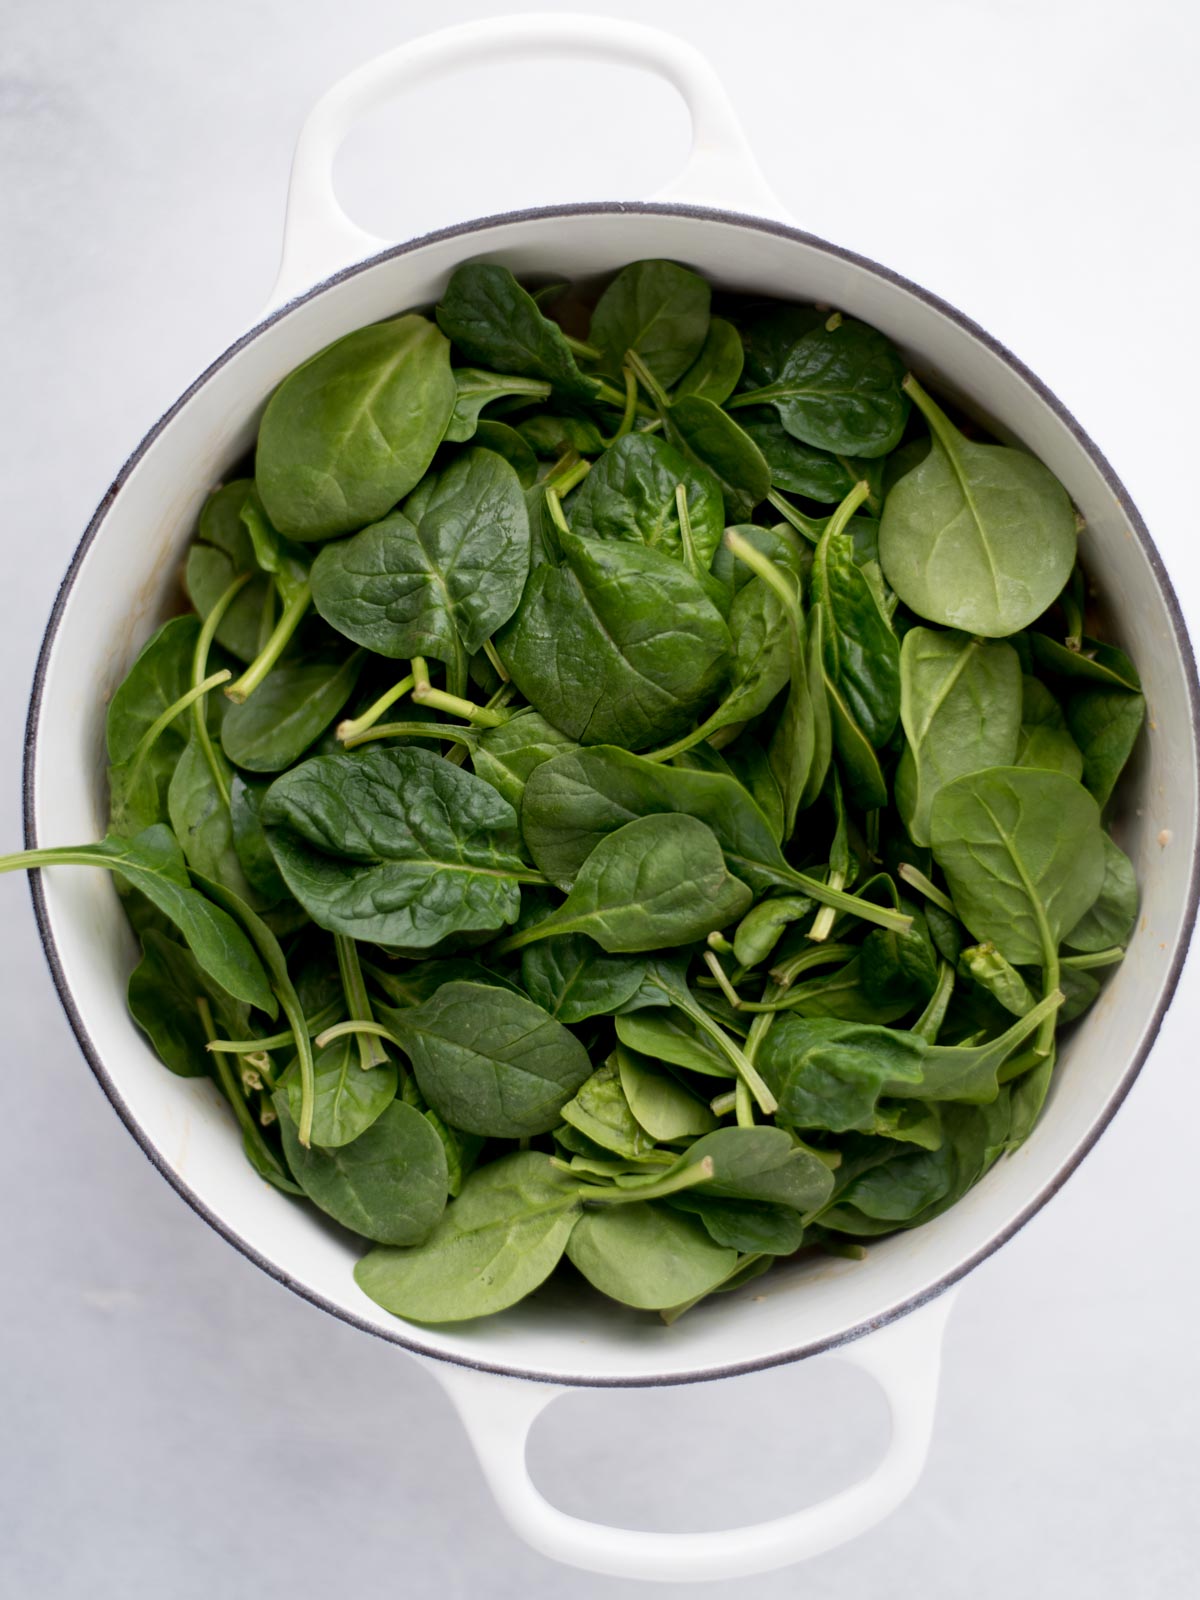 Dutch oven filled with fresh spinach leaves.